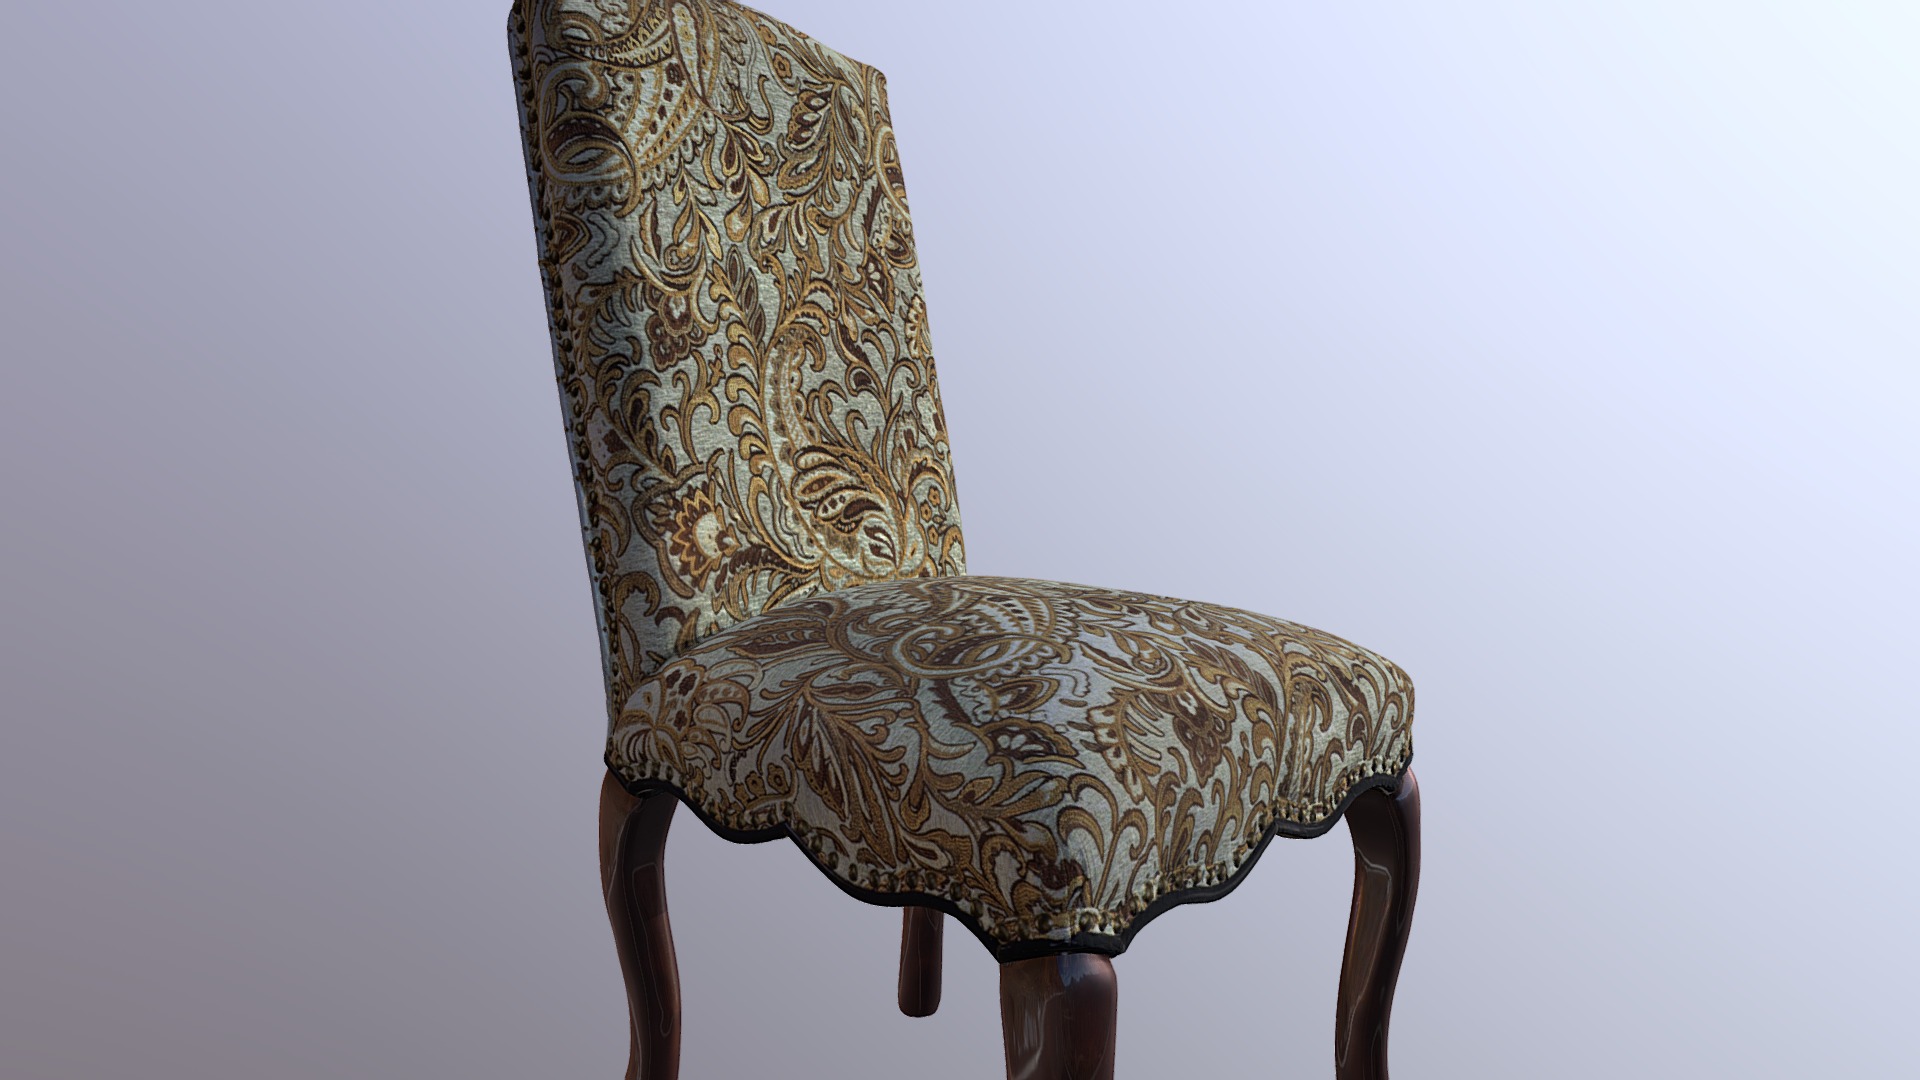 3D model Green & Gold Chair - This is a 3D model of the Green & Gold Chair. The 3D model is about a chair with a decorative armrest.